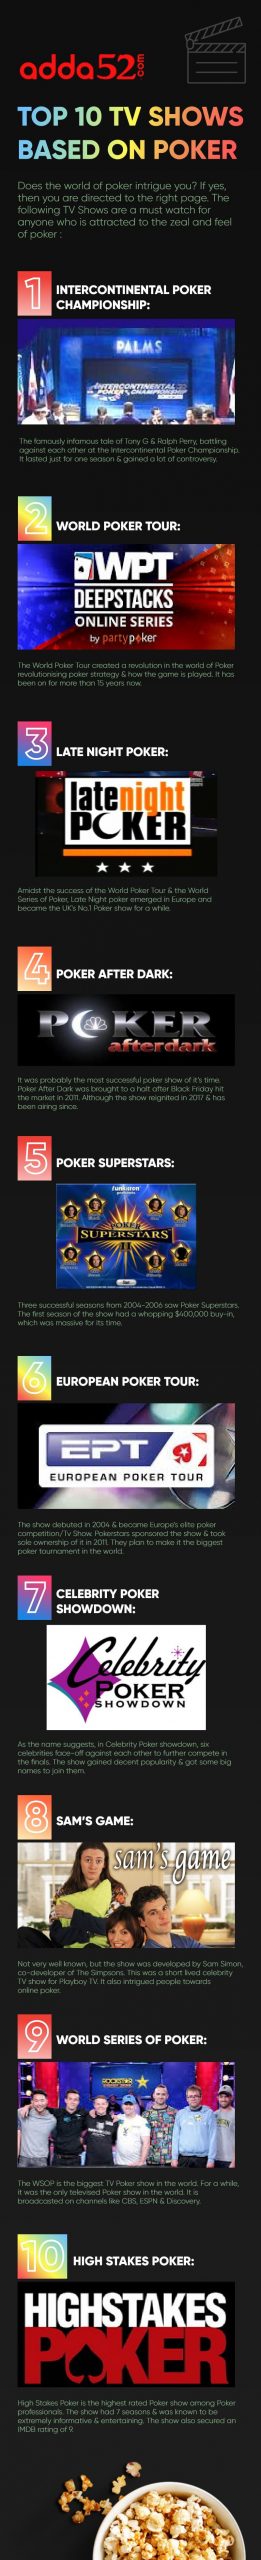 Top 10 TV shows based on Poker